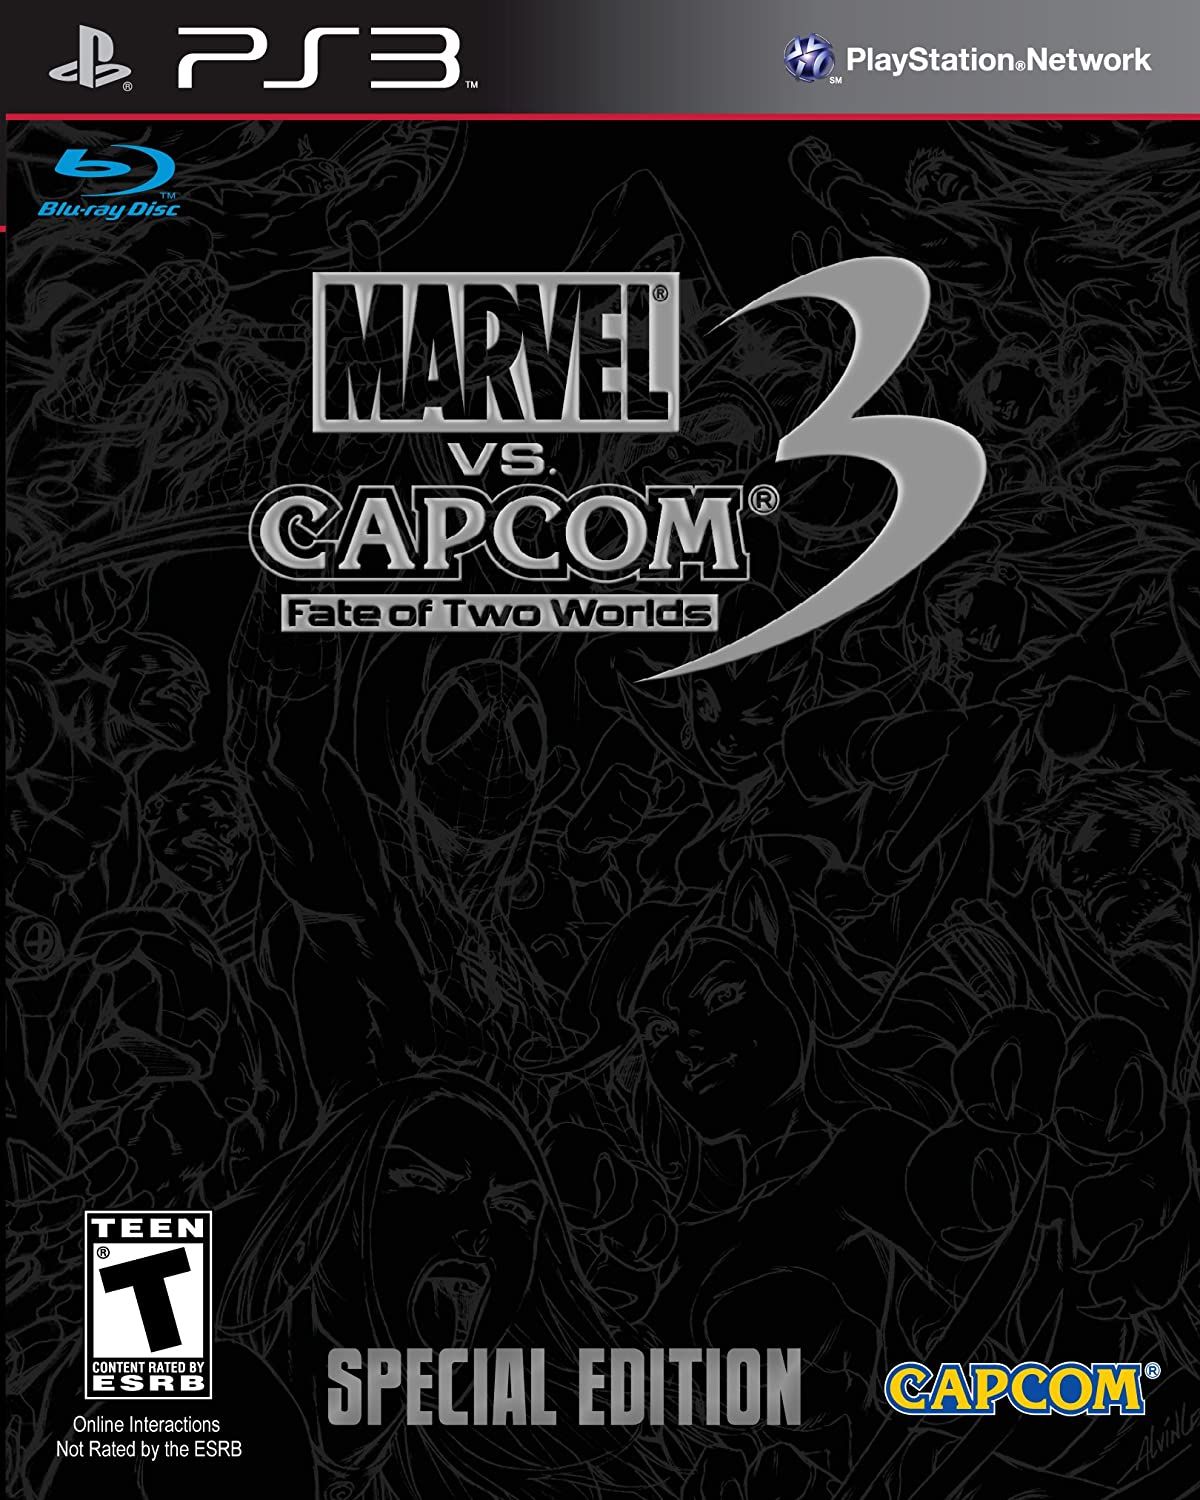 Marvel Vs. Capcom 3: Fate of Two Worlds [Special Edition] Video Game